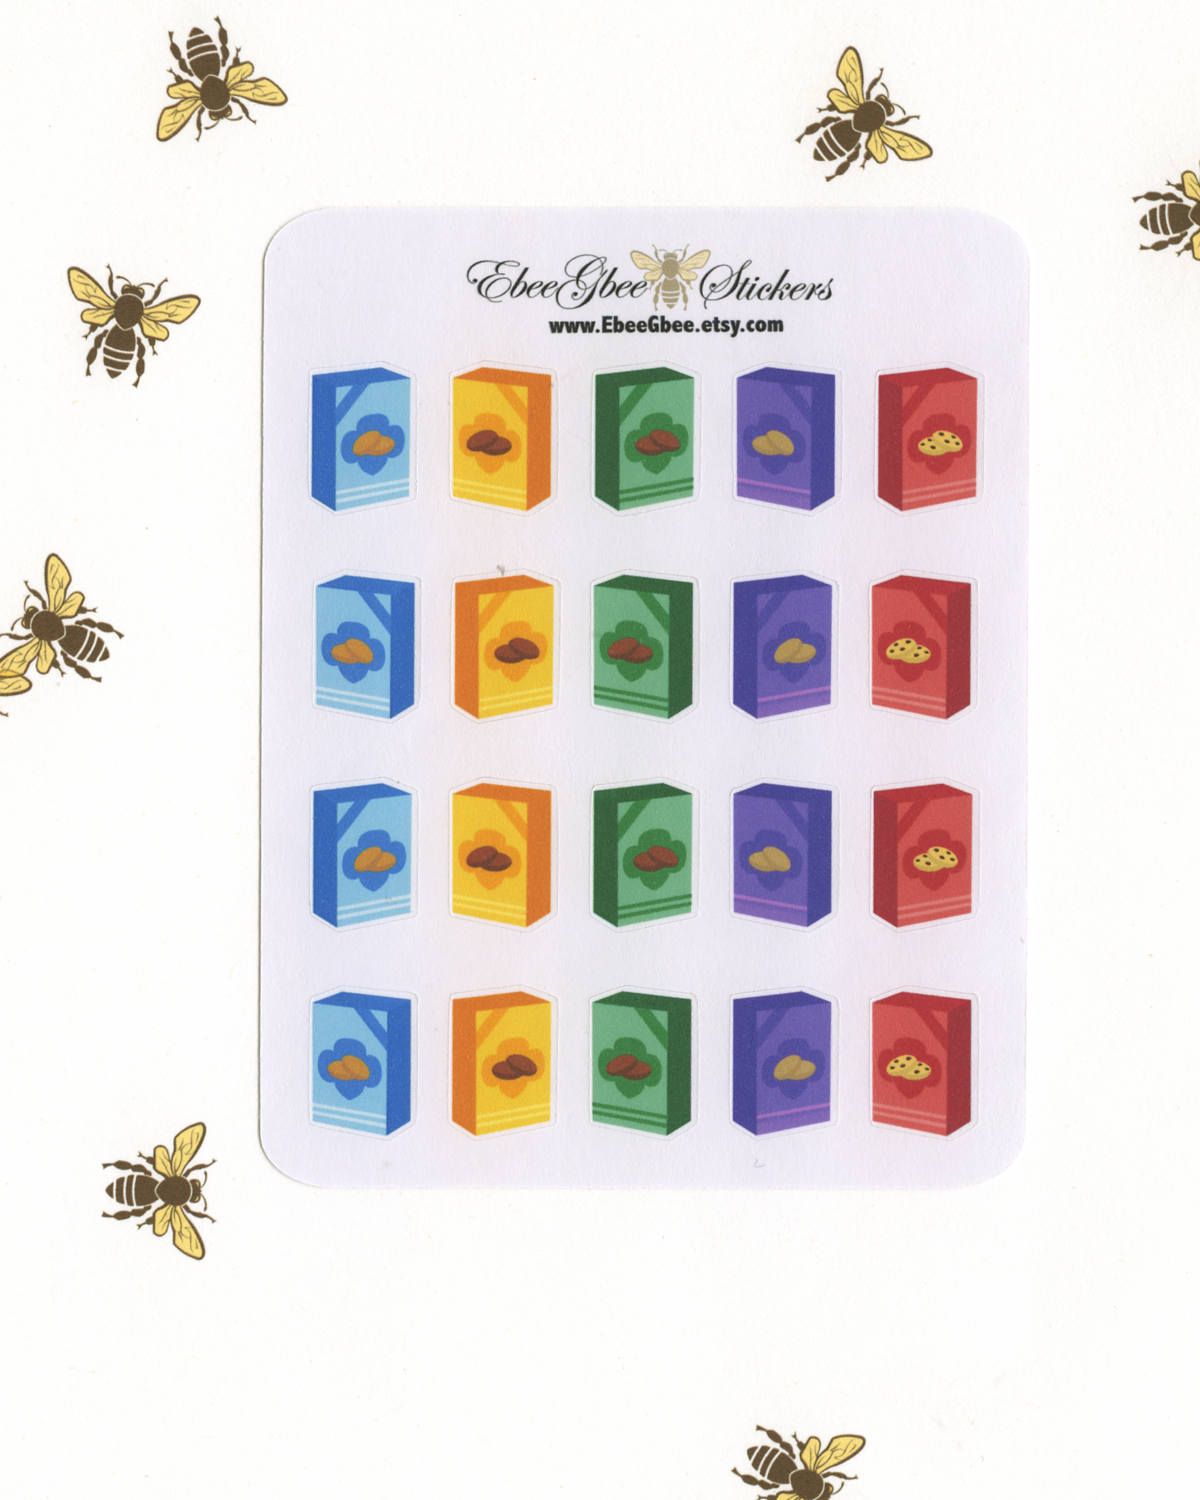 SCOUT GIRL COOKIES Planner Stickers